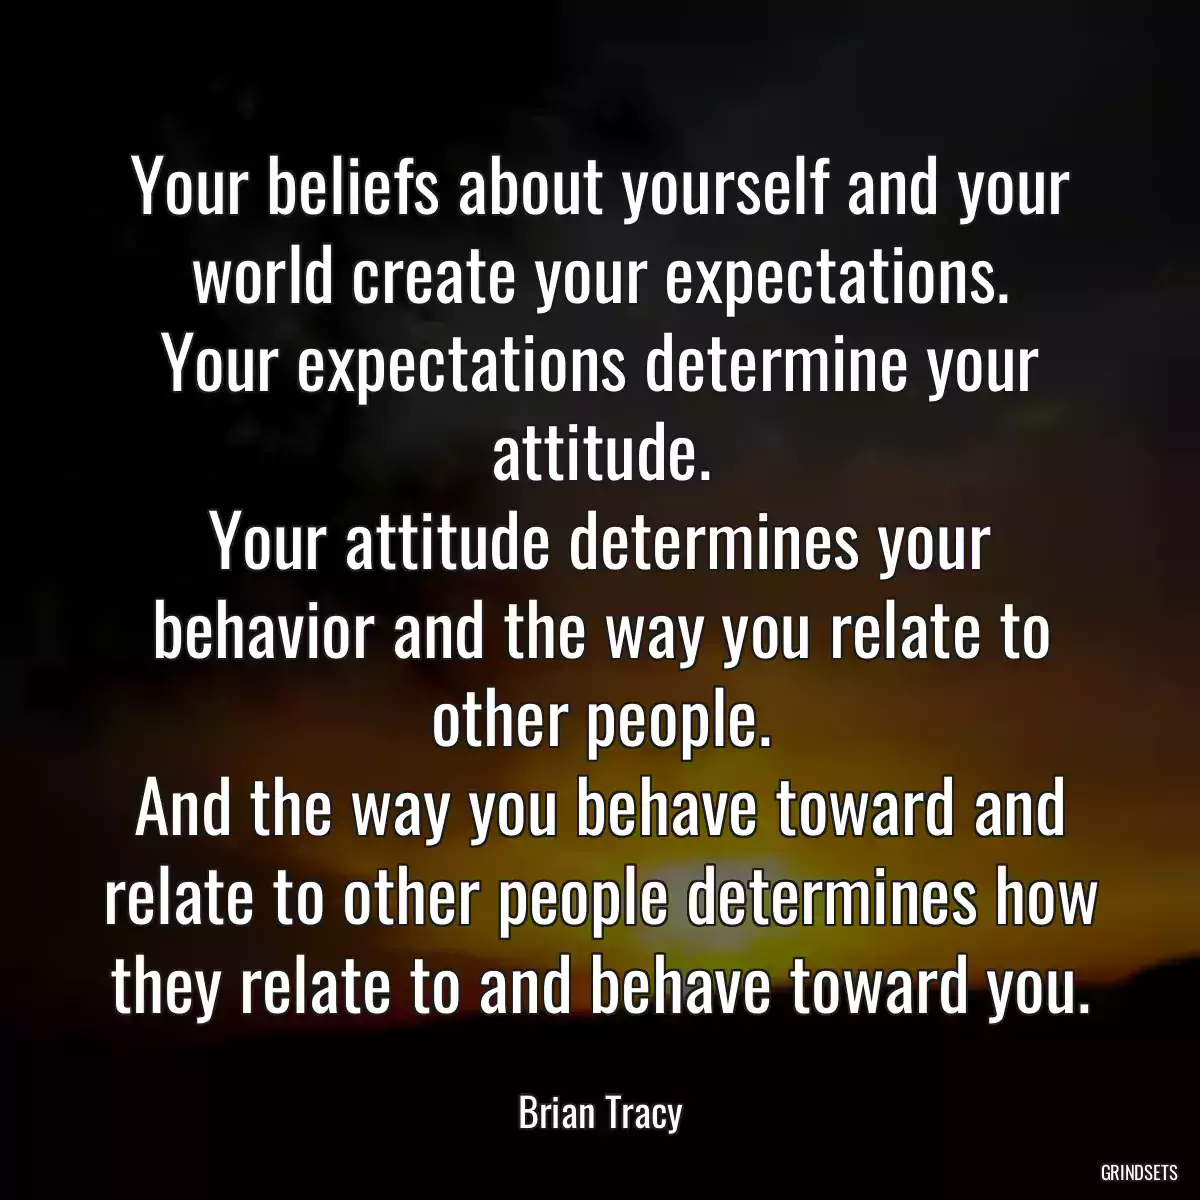 Your beliefs about yourself and your world create your expectations.
Your expectations determine your attitude.
Your attitude determines your behavior and the way you relate to other people.
And the way you behave toward and relate to other people determines how they relate to and behave toward you.